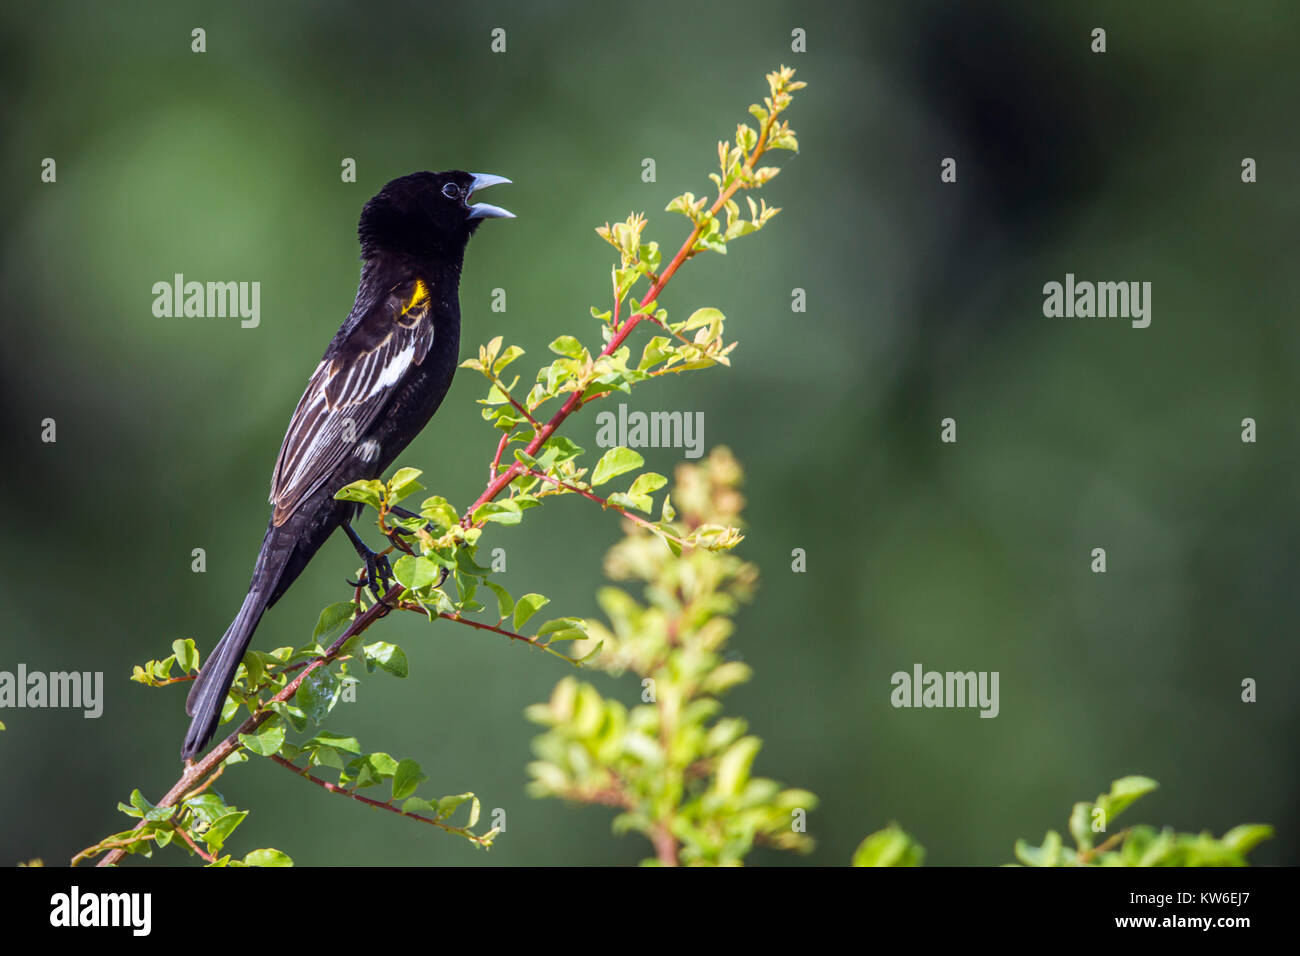 White-winged widowbird in Kruger National park, South Africa ;Specie Euplectes albonotatus family of Ploceidae Stock Photo